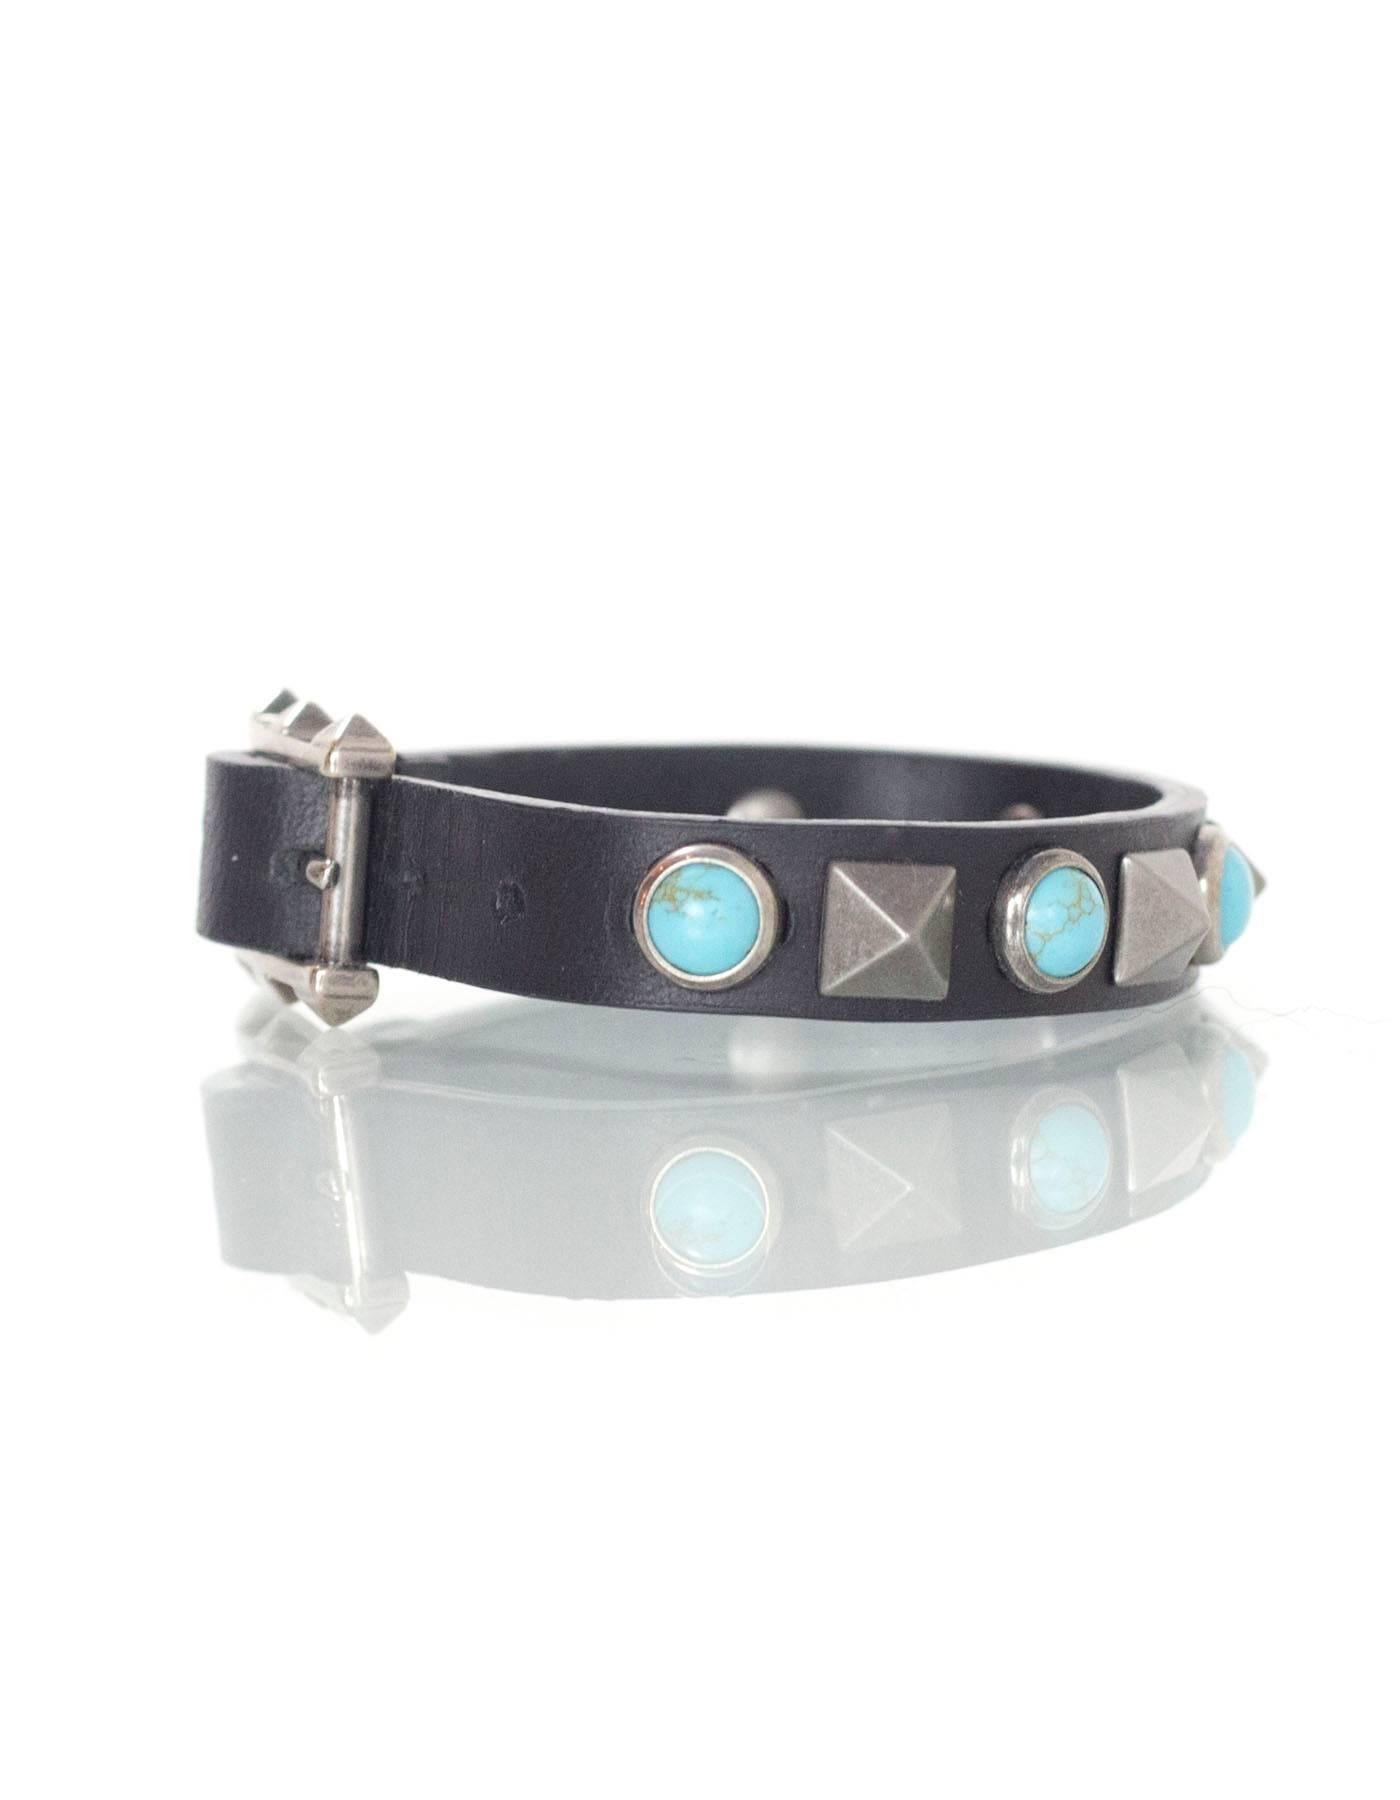 Valentino Black Leather & Turquoise Stone Wrap Bracelet
Features turquoise stones and silver rockstuds throughout

Made In: Italy
Color: Black, silver and turquoise
Materials: Leather, metal and stone
Closure/Opening: Buckle and notch